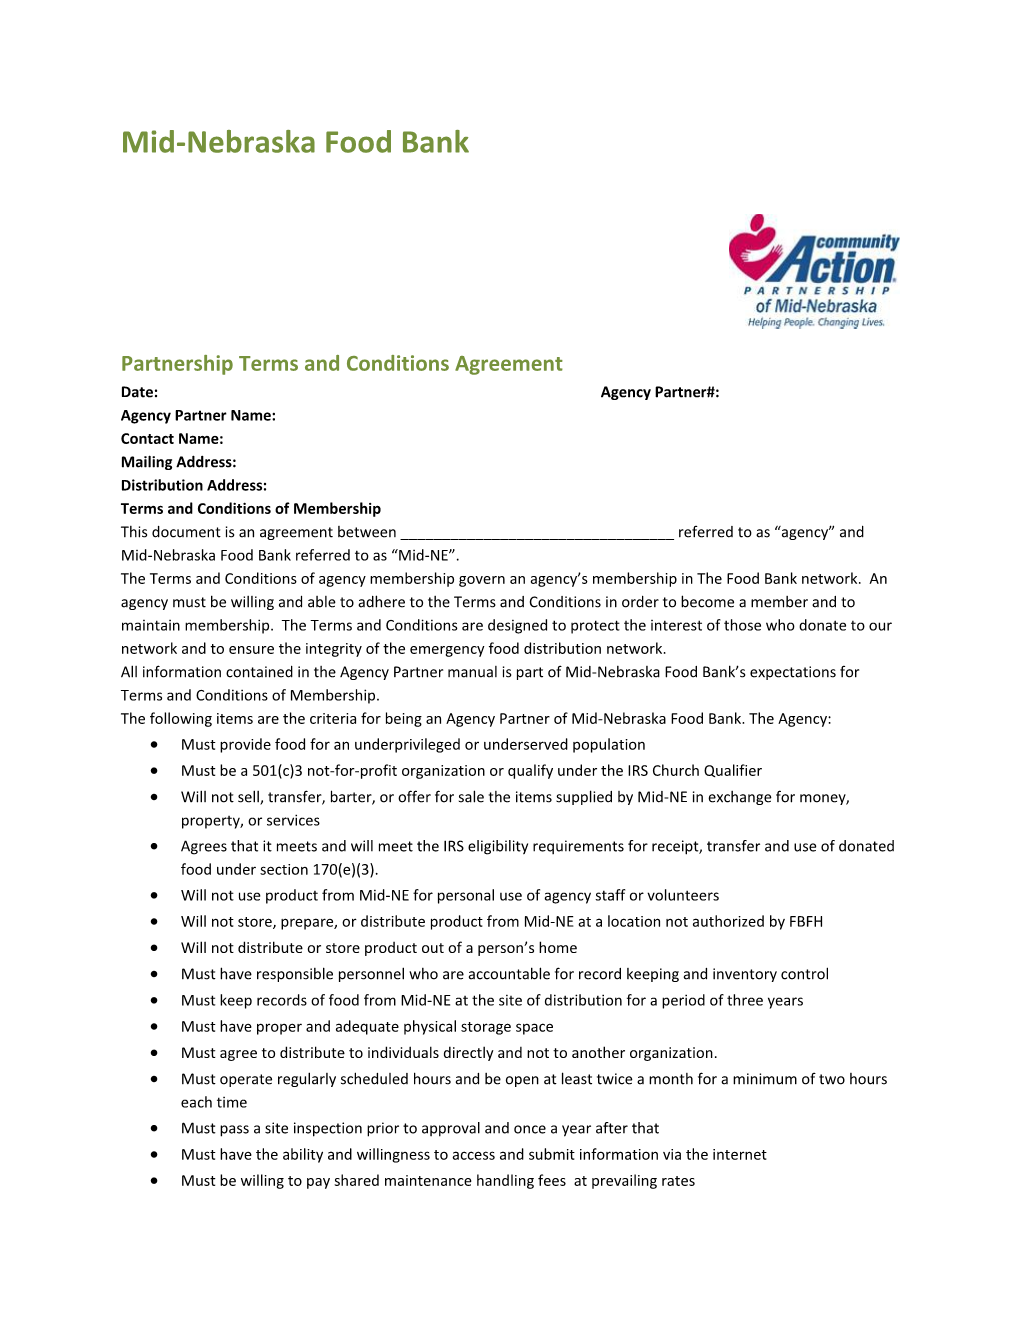 Partnership Terms and Conditions Agreement